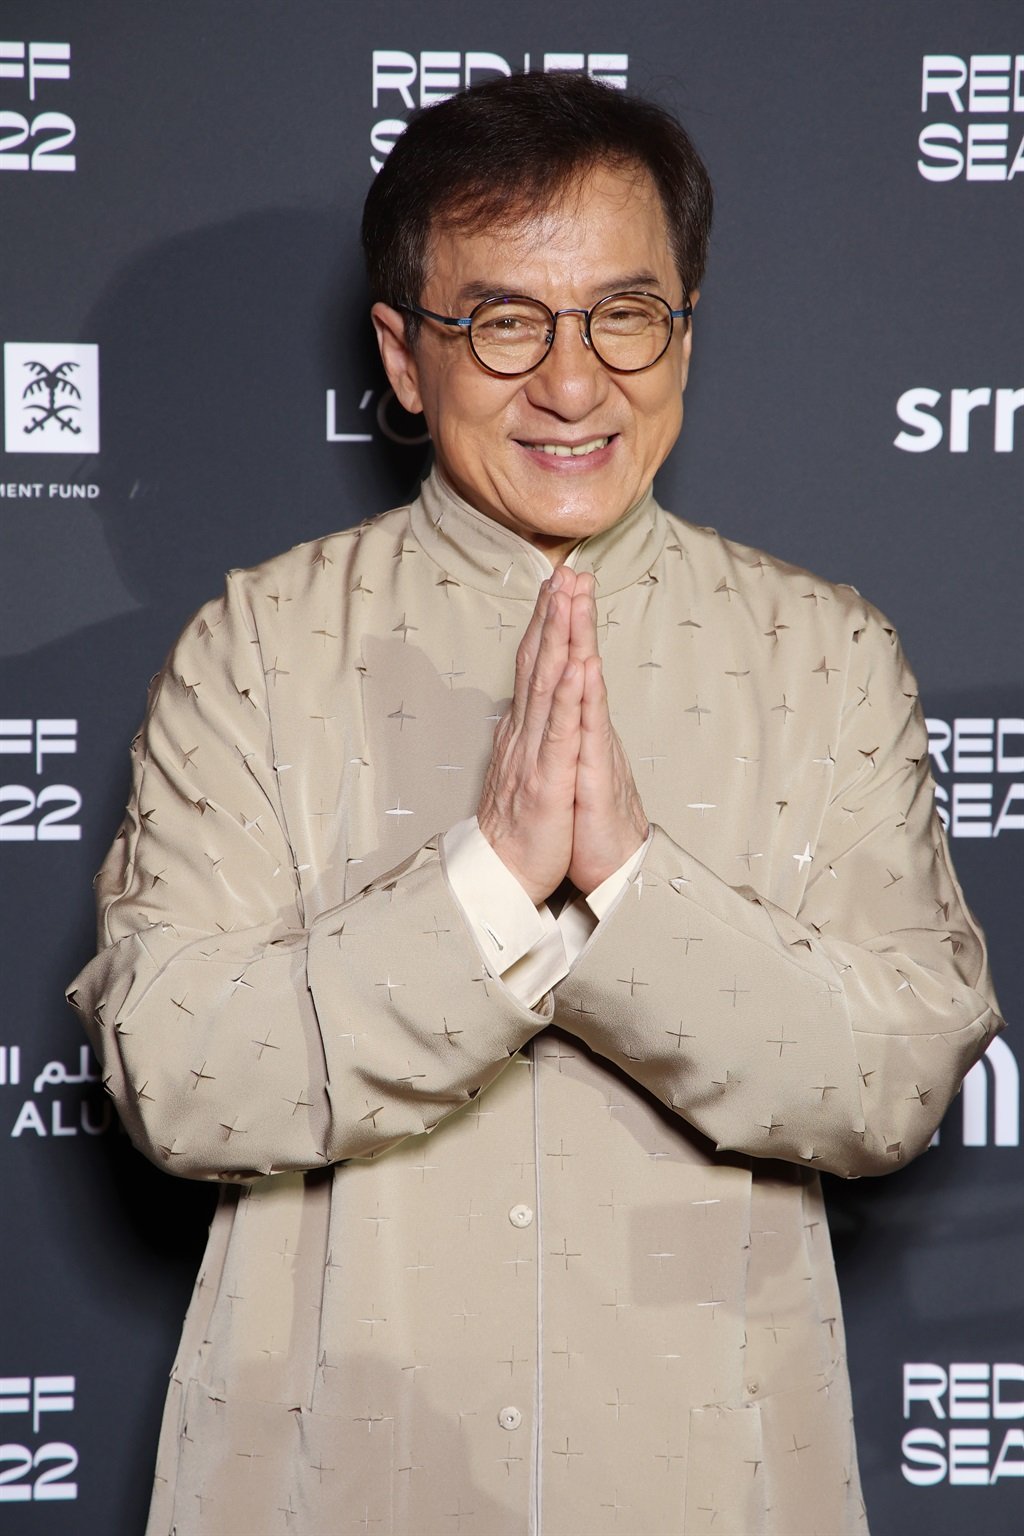 Jackie Chan has revealed that 
 Rush Hour 4 is in the works. (Photo by Daniele Venturelli/Getty Images for The Red Sea International Film Festival)